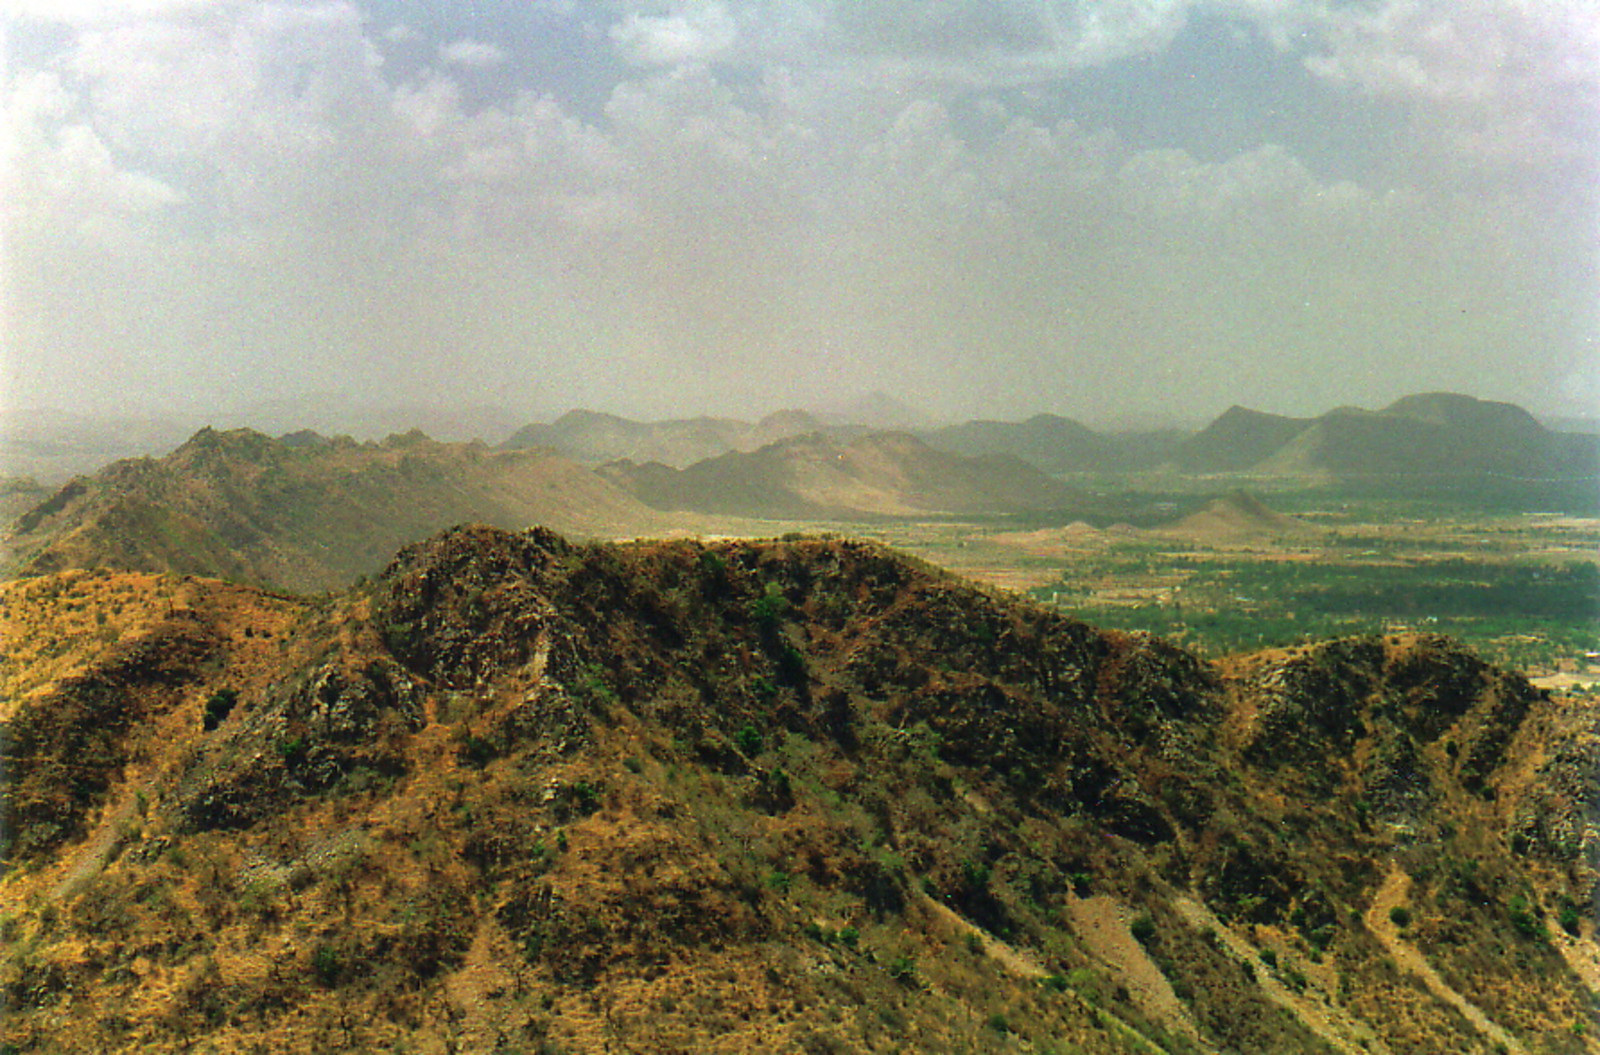 The view from the Monsoon Palace